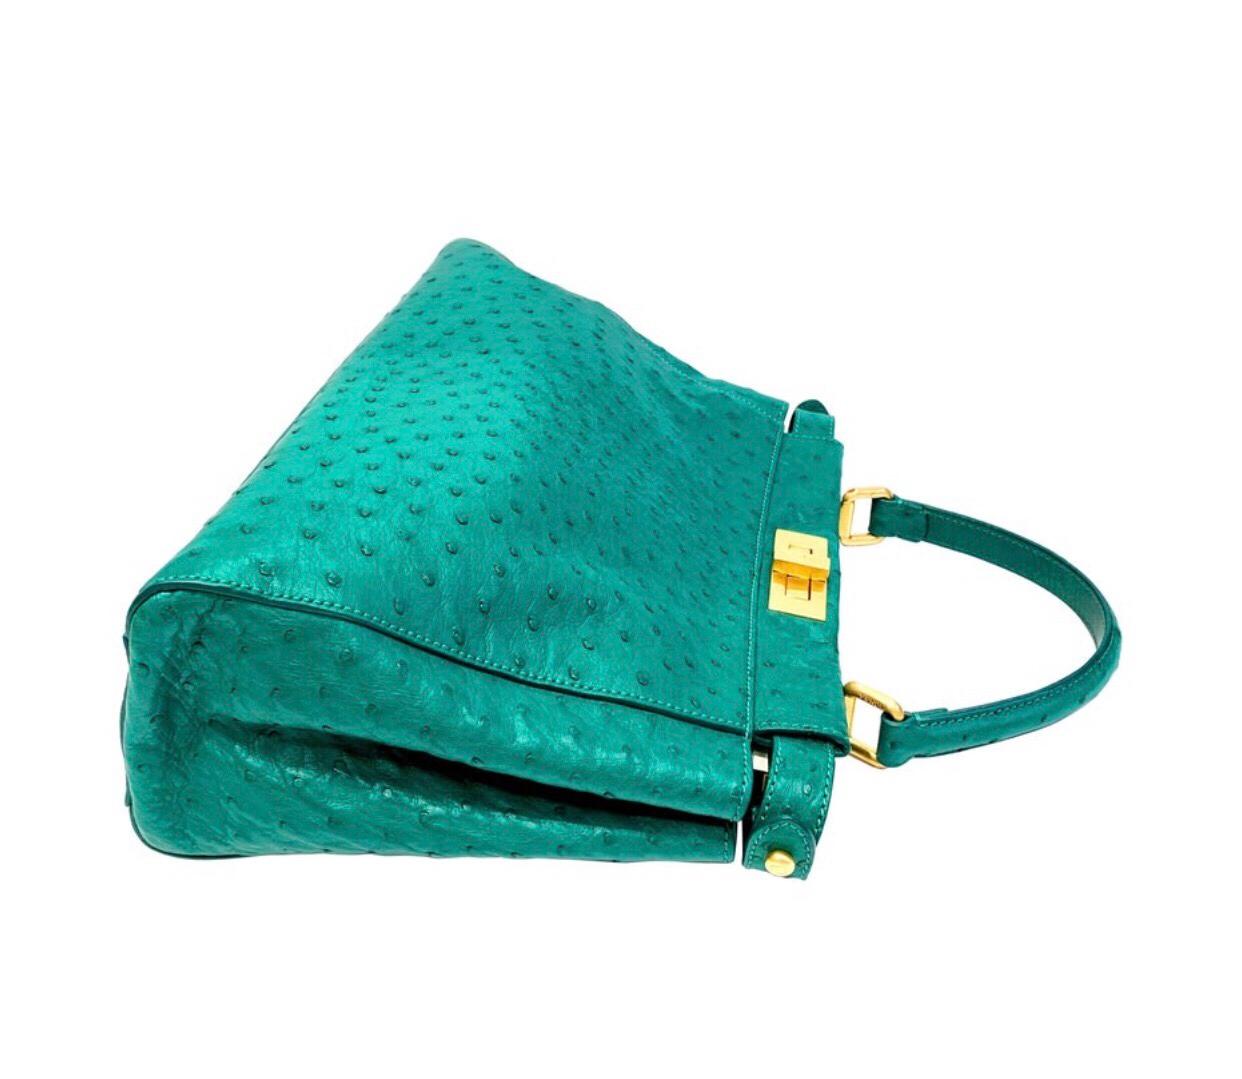 FENDI
Green Ostrich Leather Peekaboo
Perfect condition, dust-bag 
Medium handbag with two compartments divided by a stiff partition. Twist lock on both sides. Lined interior with double pocket. Single handle and thin adjustable, detachable